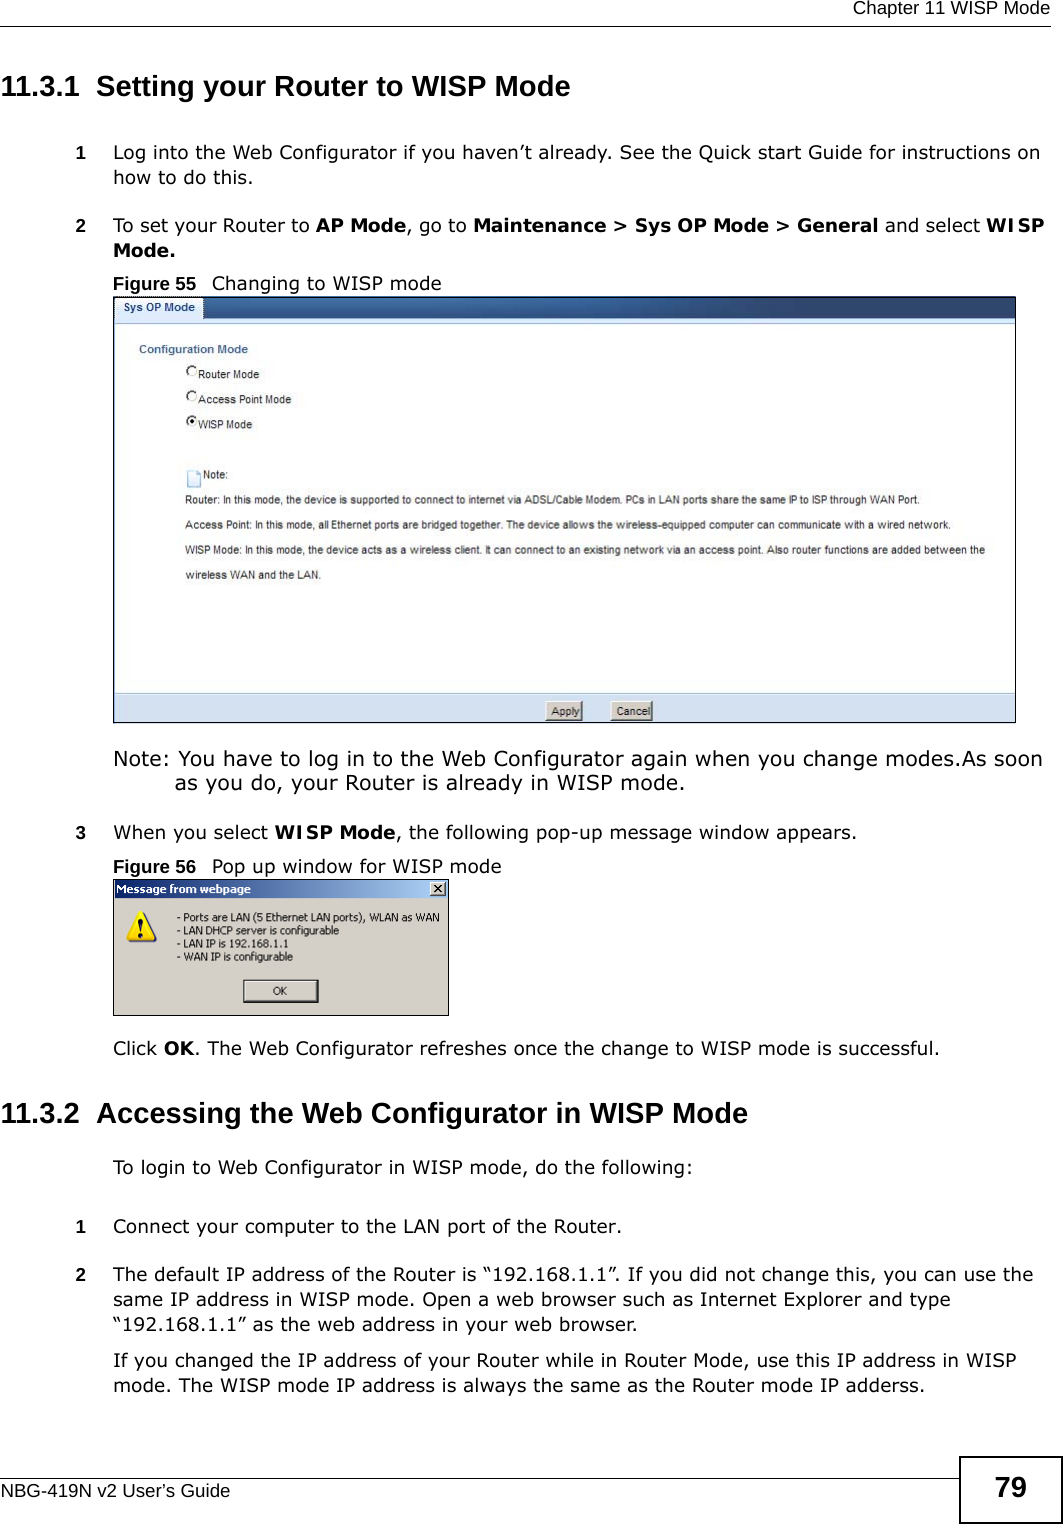  Chapter 11 WISP ModeNBG-419N v2 User’s Guide 7911.3.1  Setting your Router to WISP Mode1Log into the Web Configurator if you haven’t already. See the Quick start Guide for instructions on how to do this.2To set your Router to AP Mode, go to Maintenance &gt; Sys OP Mode &gt; General and select WISP Mode. Figure 55   Changing to WISP modeNote: You have to log in to the Web Configurator again when you change modes.As soon as you do, your Router is already in WISP mode.3When you select WISP Mode, the following pop-up message window appears.Figure 56   Pop up window for WISP mode Click OK. The Web Configurator refreshes once the change to WISP mode is successful.11.3.2  Accessing the Web Configurator in WISP ModeTo login to Web Configurator in WISP mode, do the following:1Connect your computer to the LAN port of the Router. 2The default IP address of the Router is “192.168.1.1”. If you did not change this, you can use the same IP address in WISP mode. Open a web browser such as Internet Explorer and type “192.168.1.1” as the web address in your web browser. If you changed the IP address of your Router while in Router Mode, use this IP address in WISP mode. The WISP mode IP address is always the same as the Router mode IP adderss.